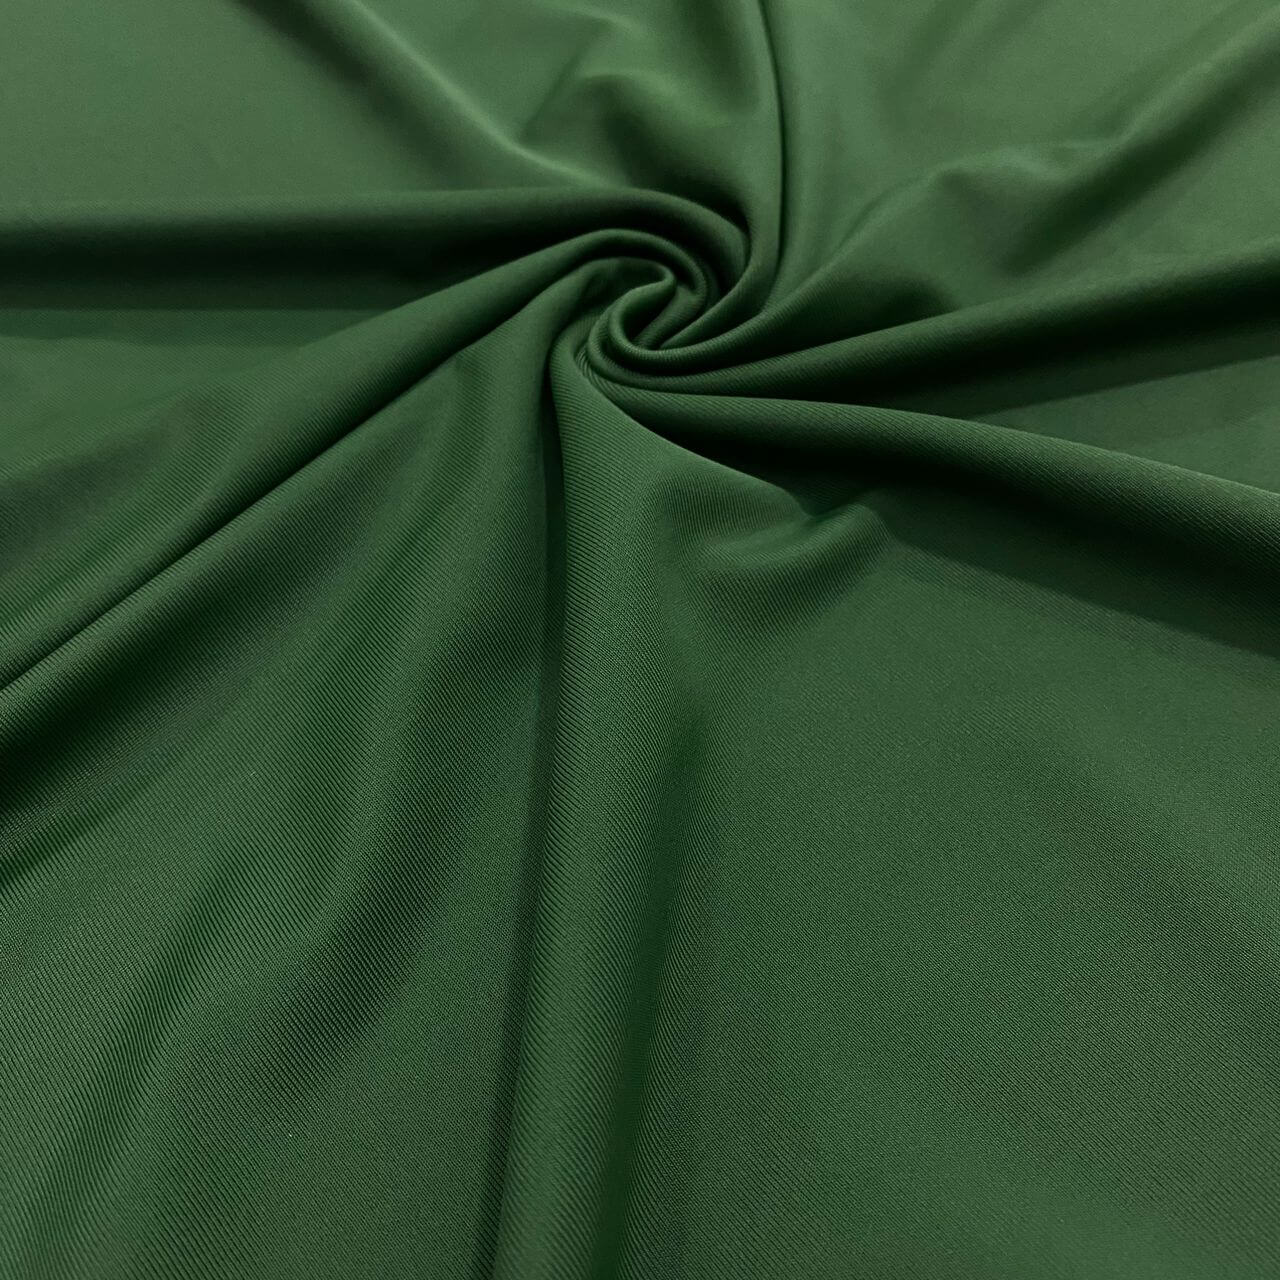 ♻️Poly Recycle Solid Army Green Matte Finish Polyester Spandex Fabric 4 Way  Stretch By Yard (243-10) Spandex Fabric